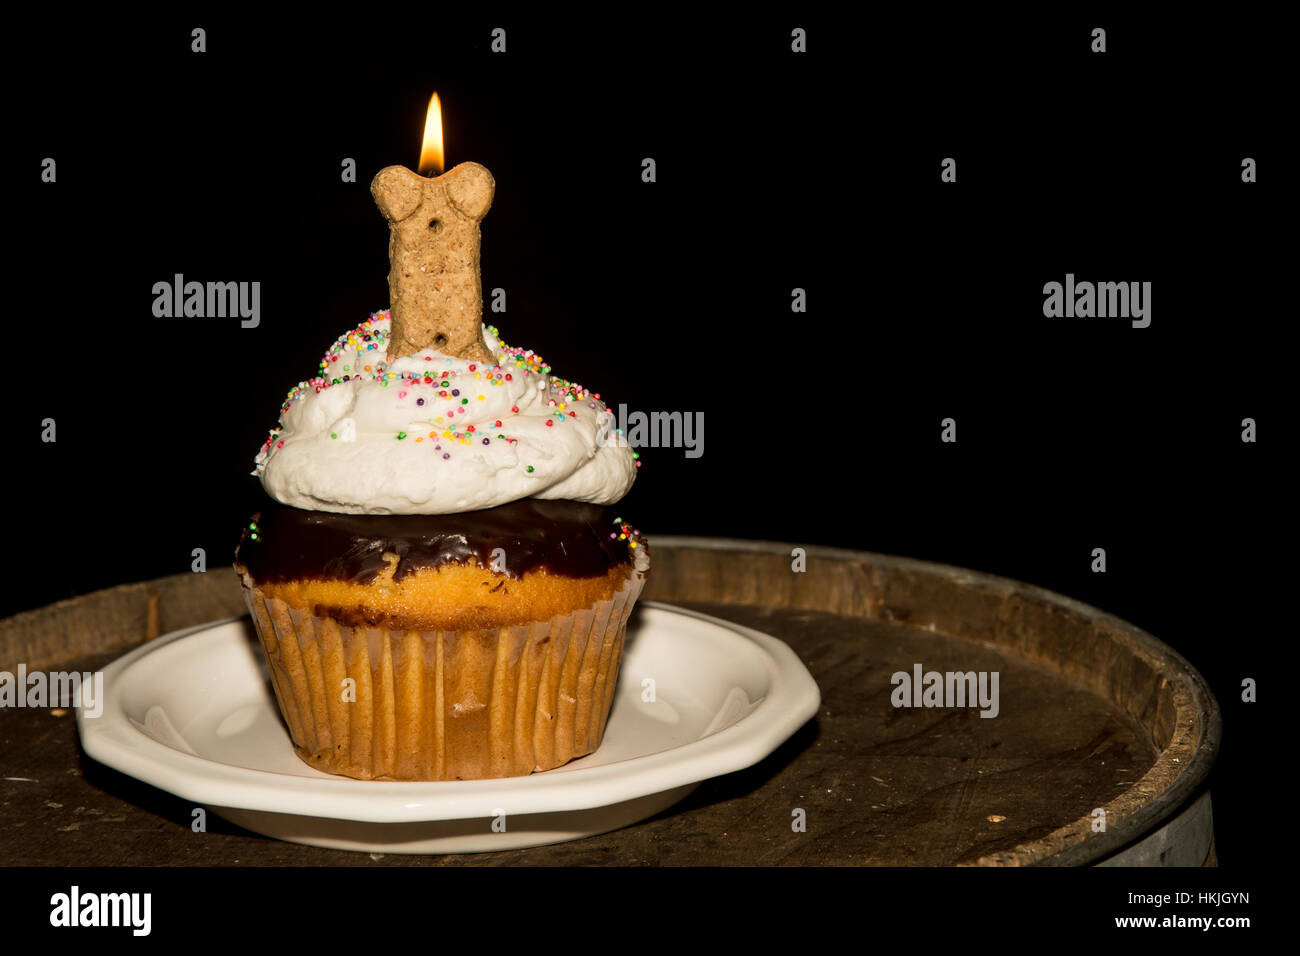 A birthday cupcake for the pet dog. Stock Photo